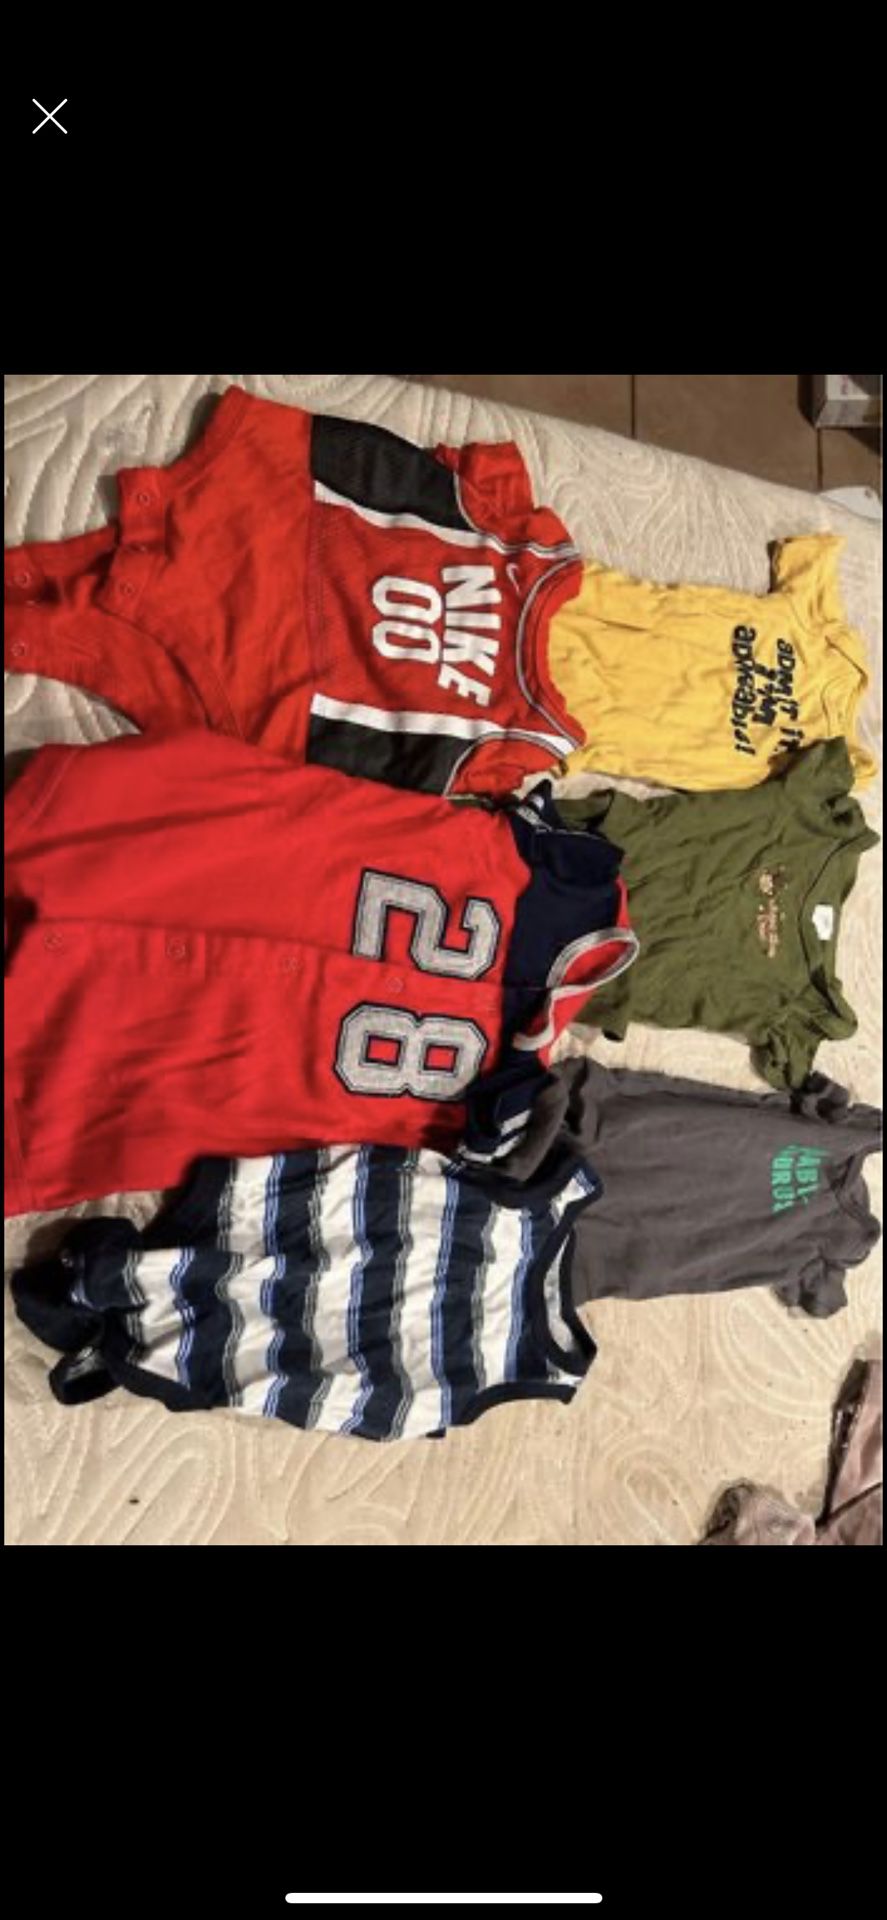 Baby Boy Clothes And More Need Gone ASAP!!!